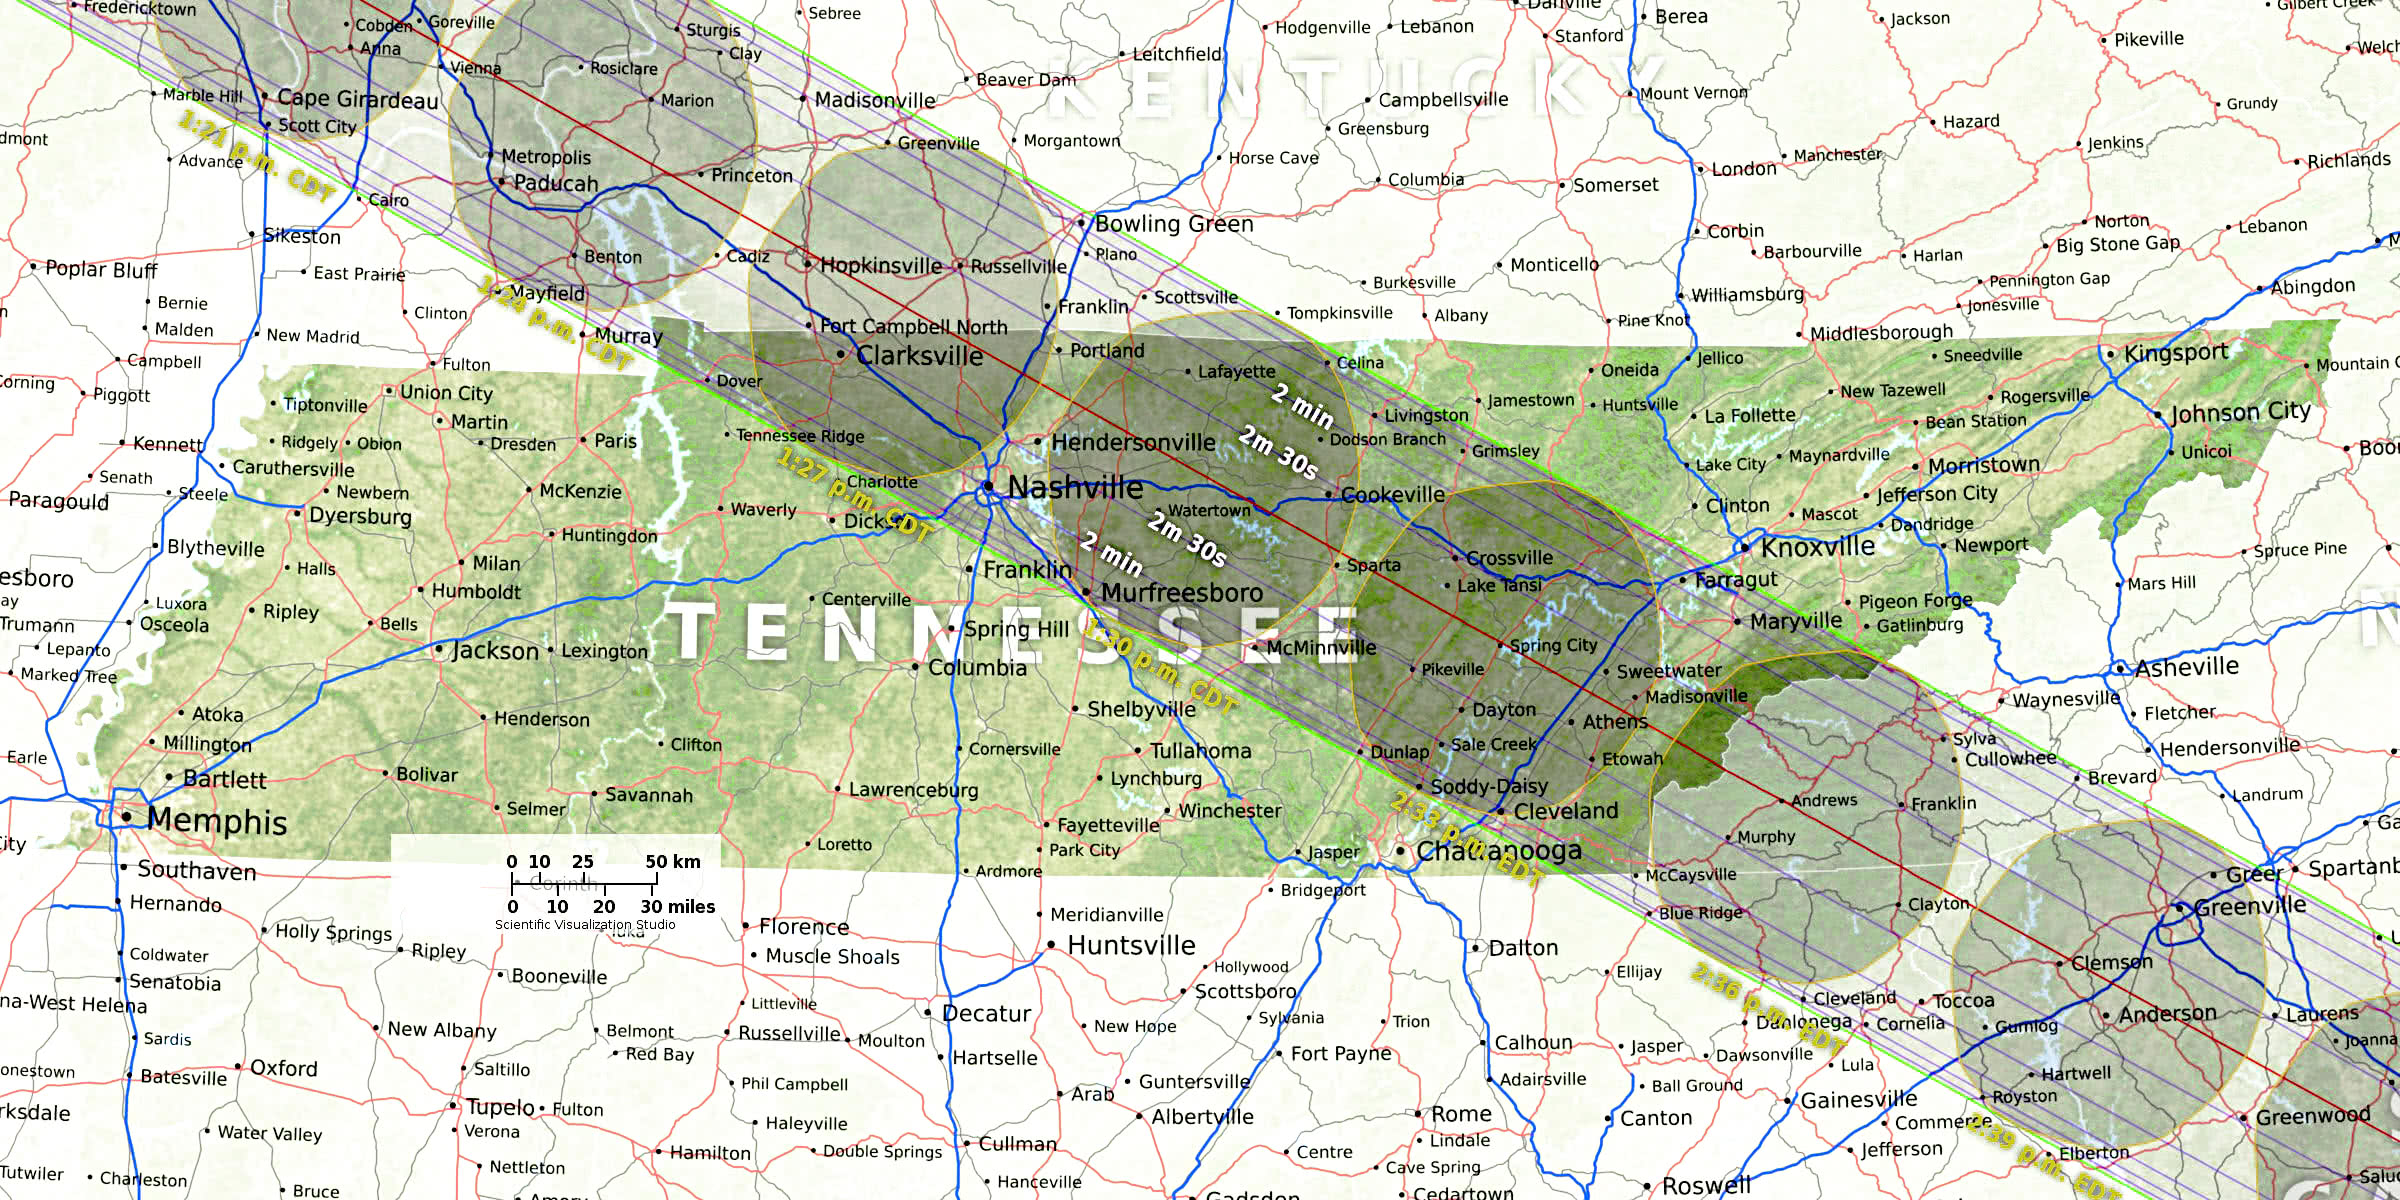 Tennessee eclipse path